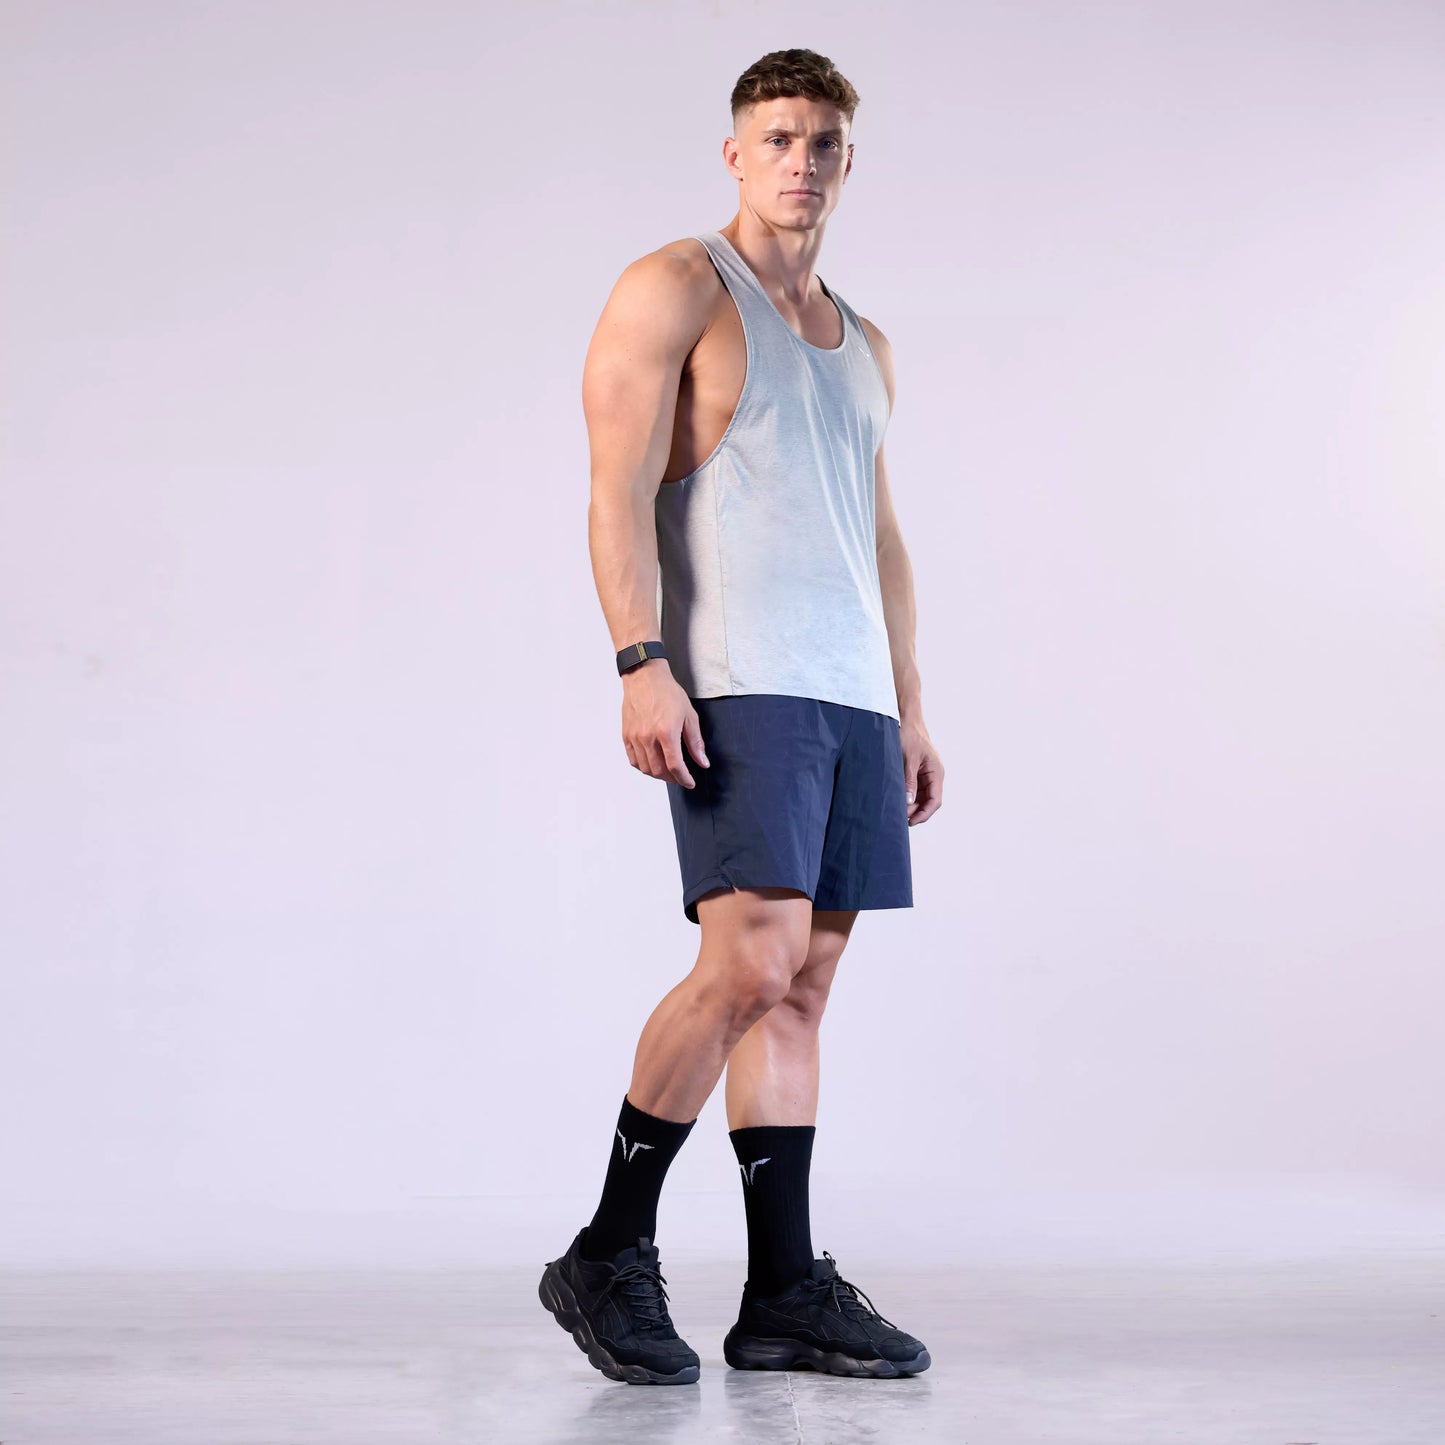 squatwolf-gym-wear-pack-of-3-core-crew-socks-onyx-workout